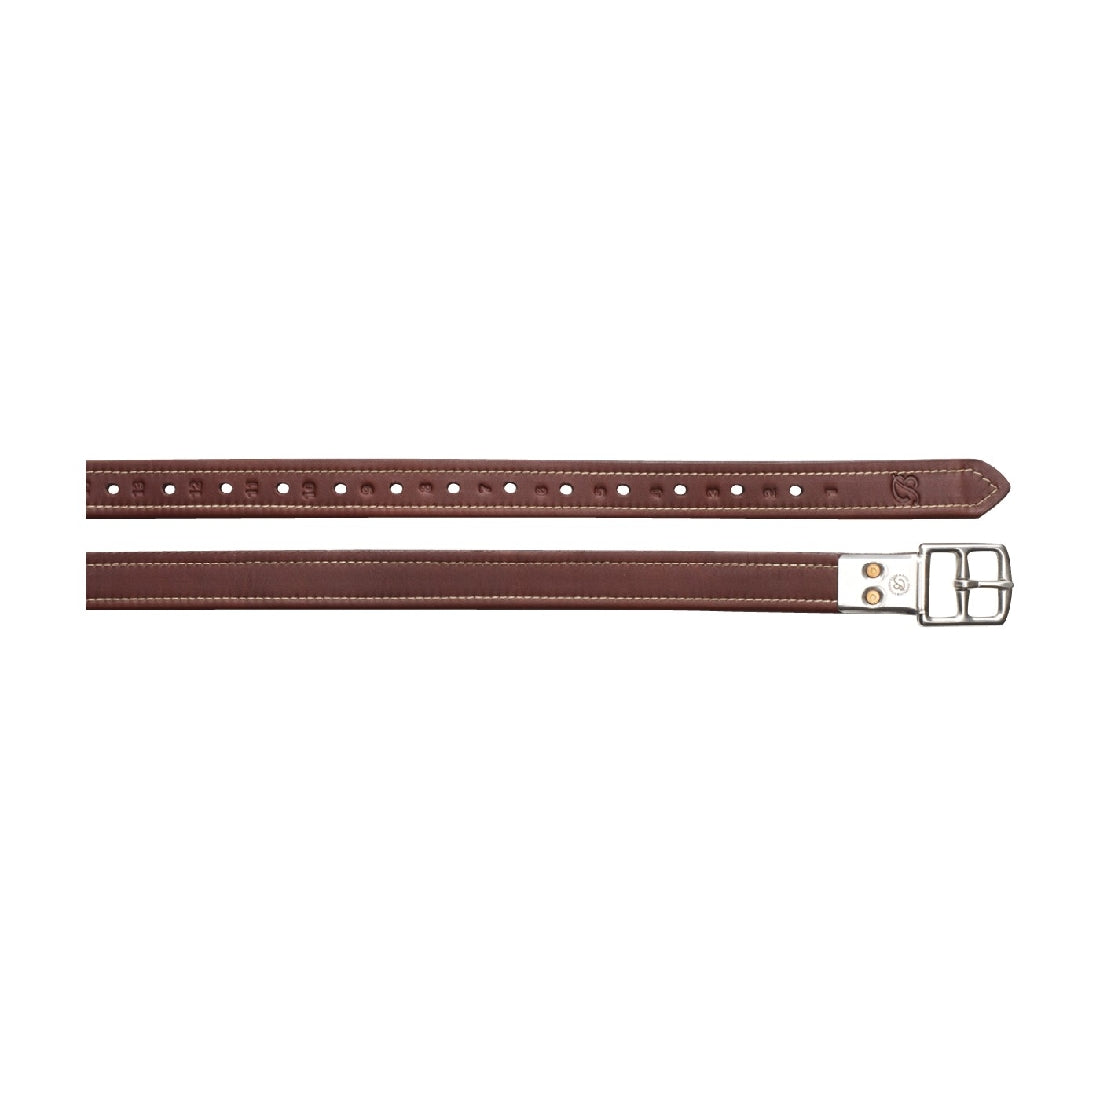 Brown stirrup leathers for horse riding with buckle detail.